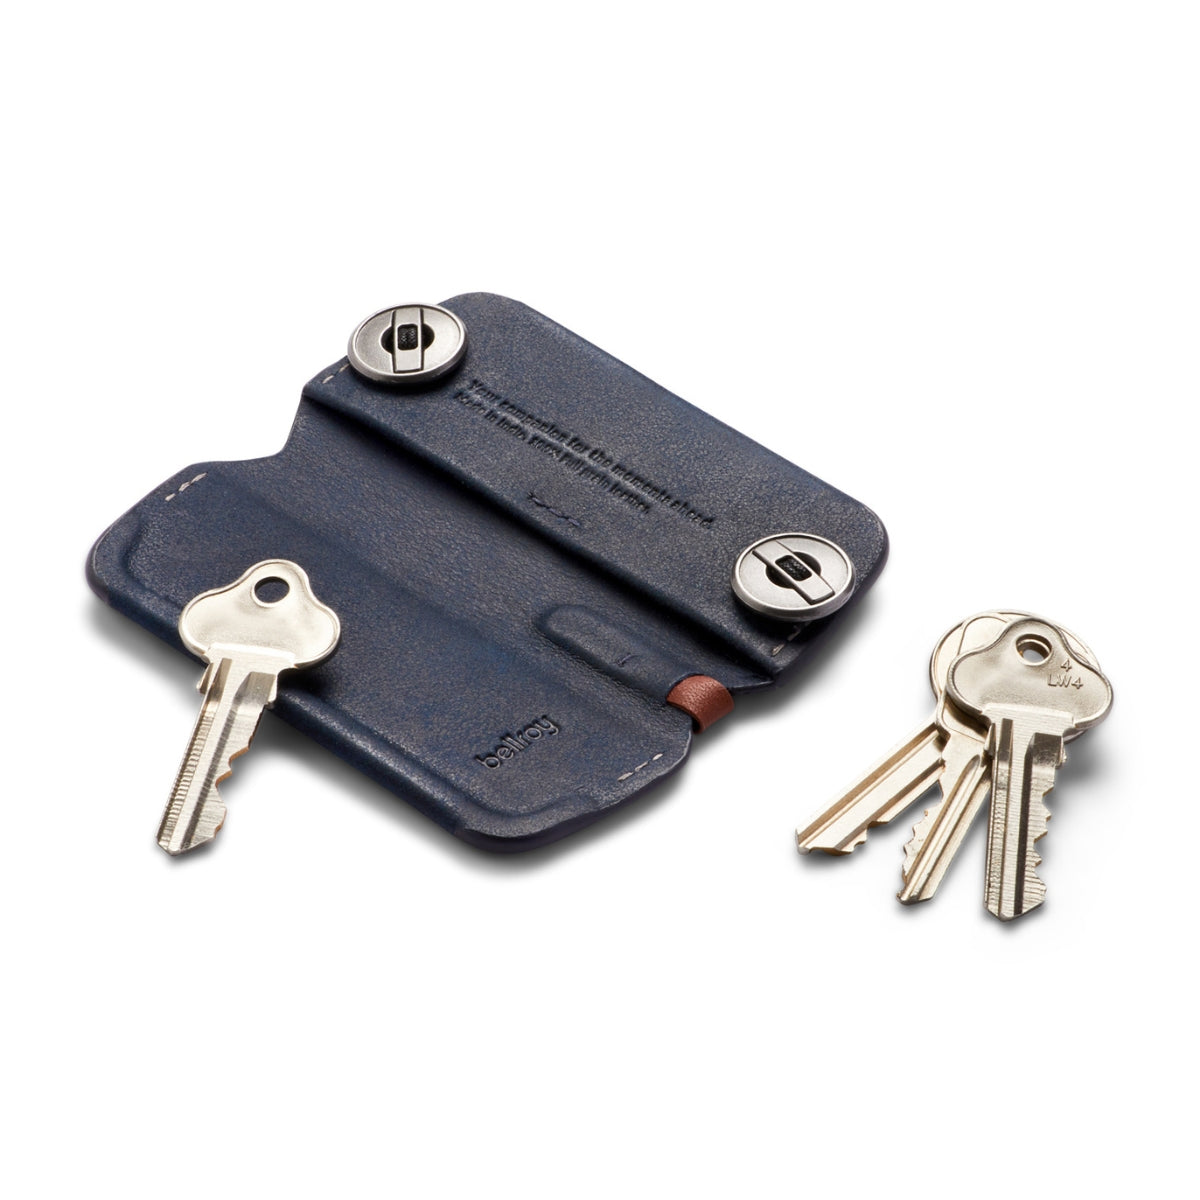 Bellroy Key Cover Plus (Third Edition) in Ocean